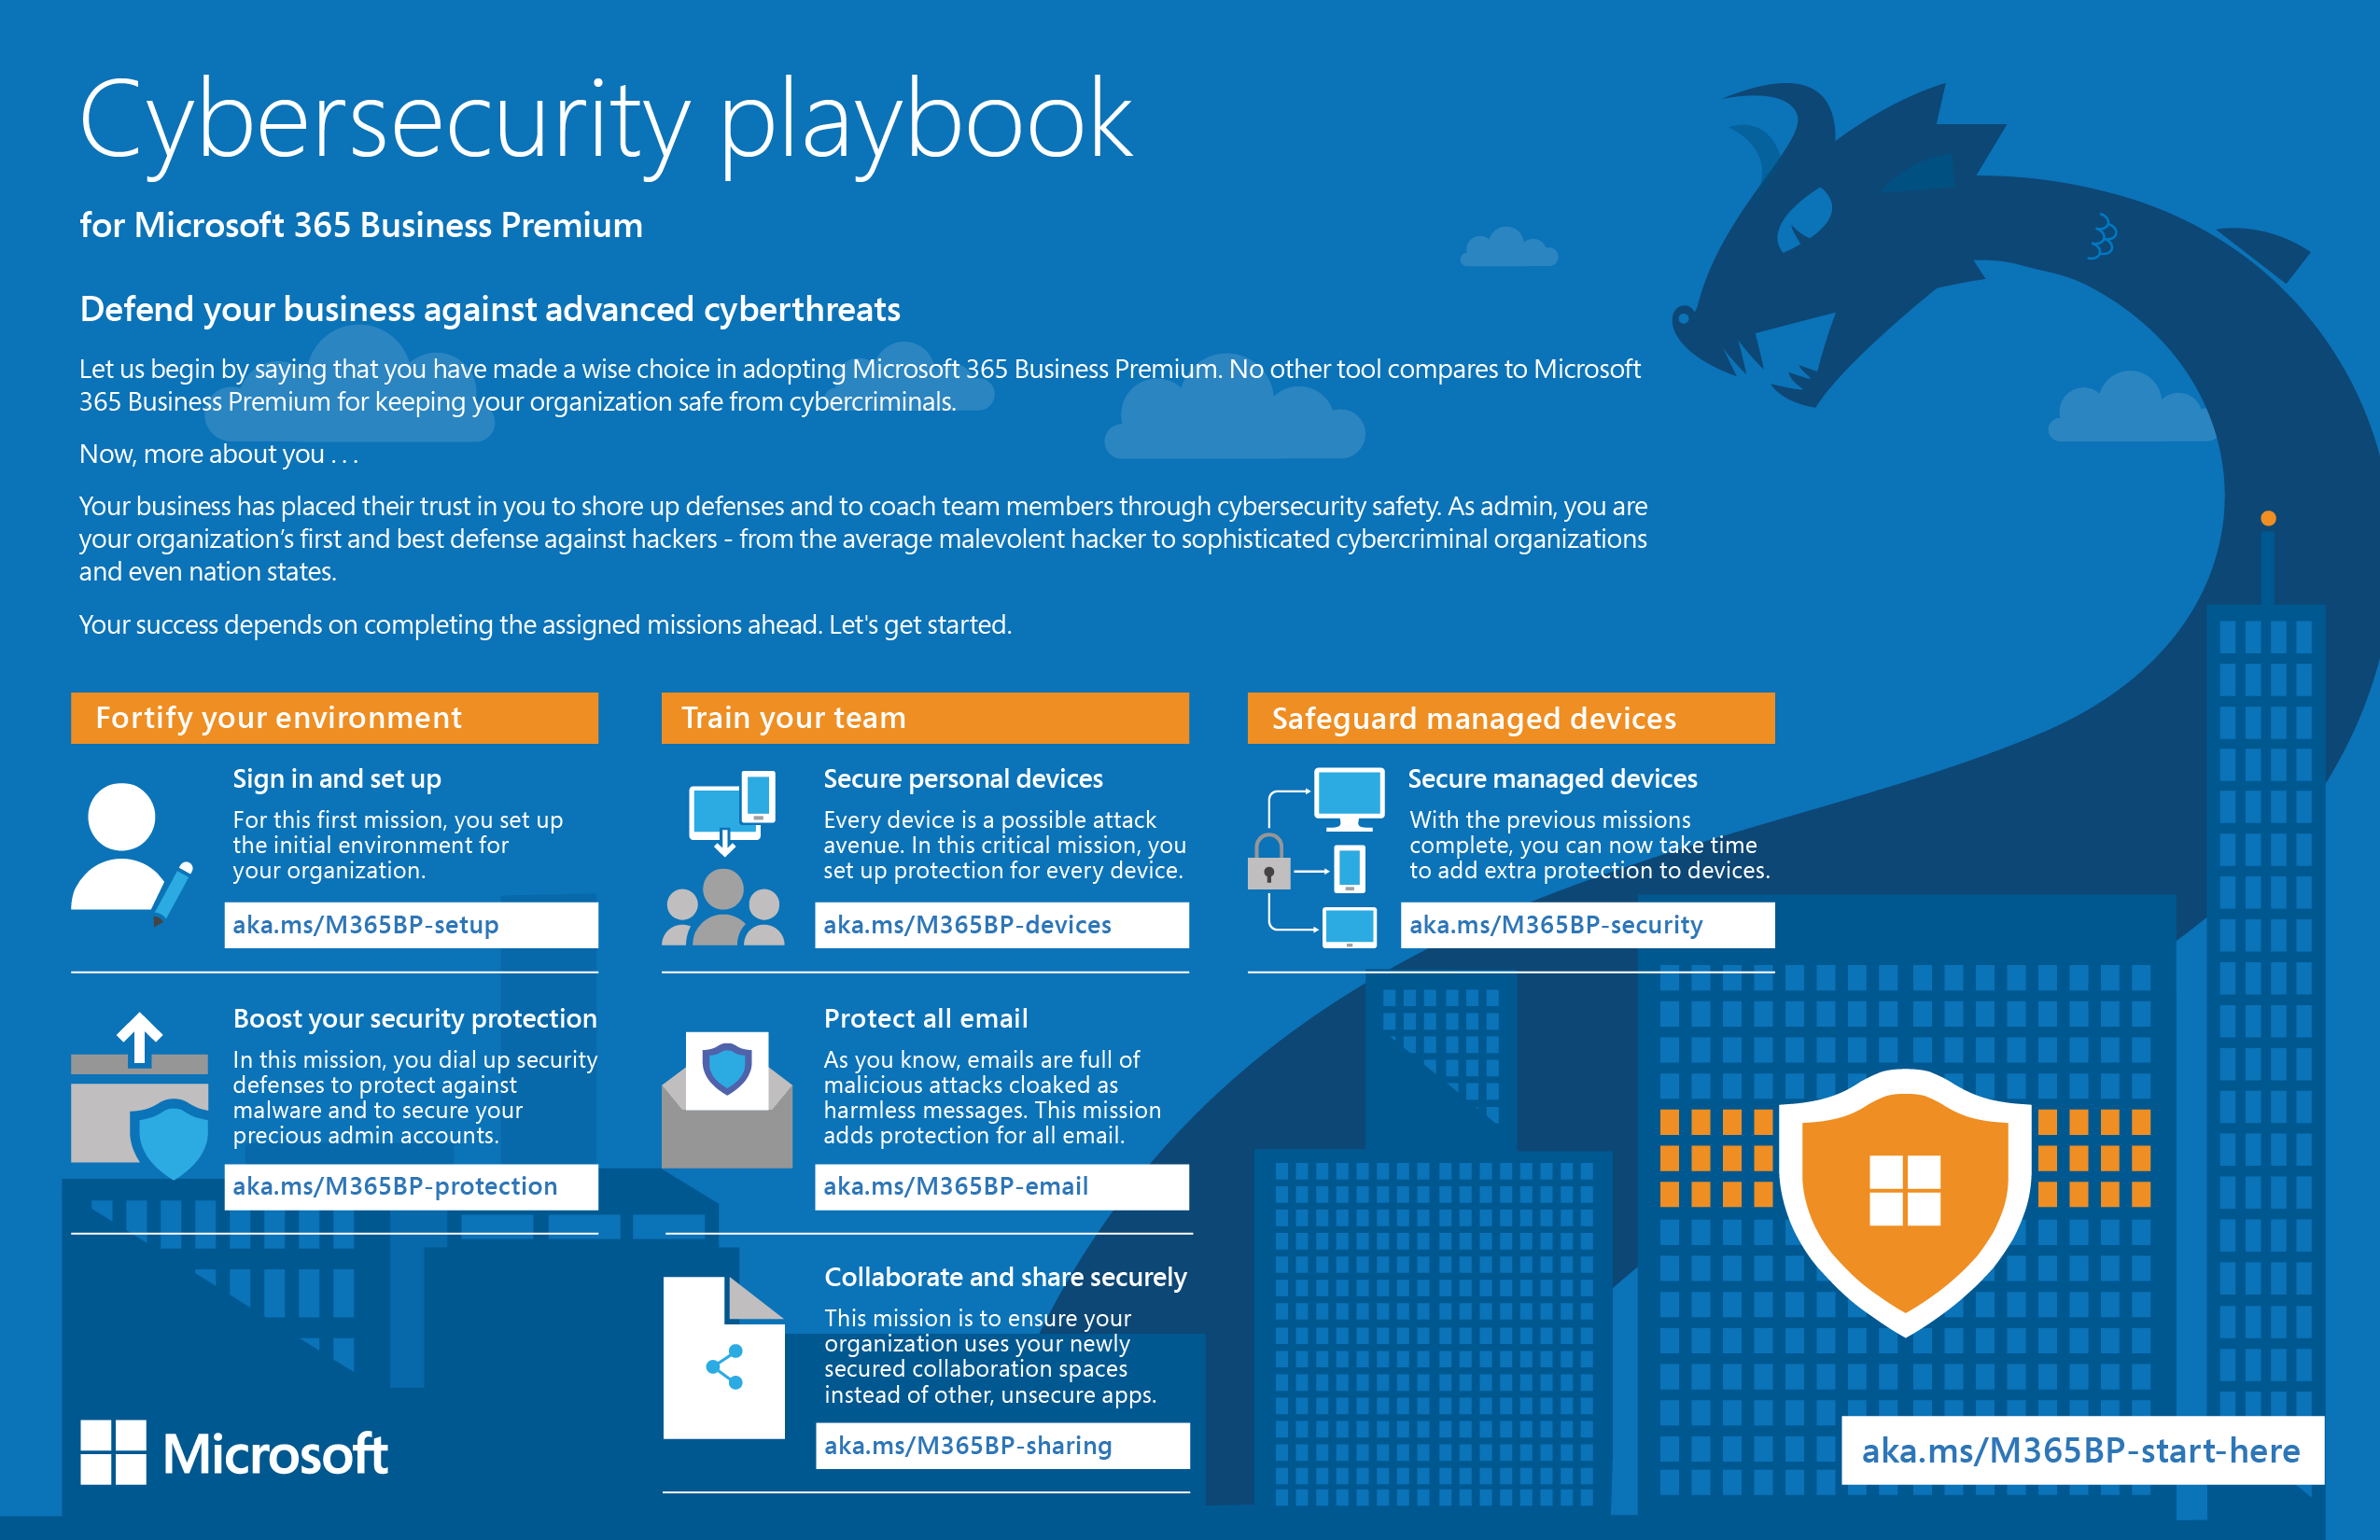 The Cybersecurity Playbook